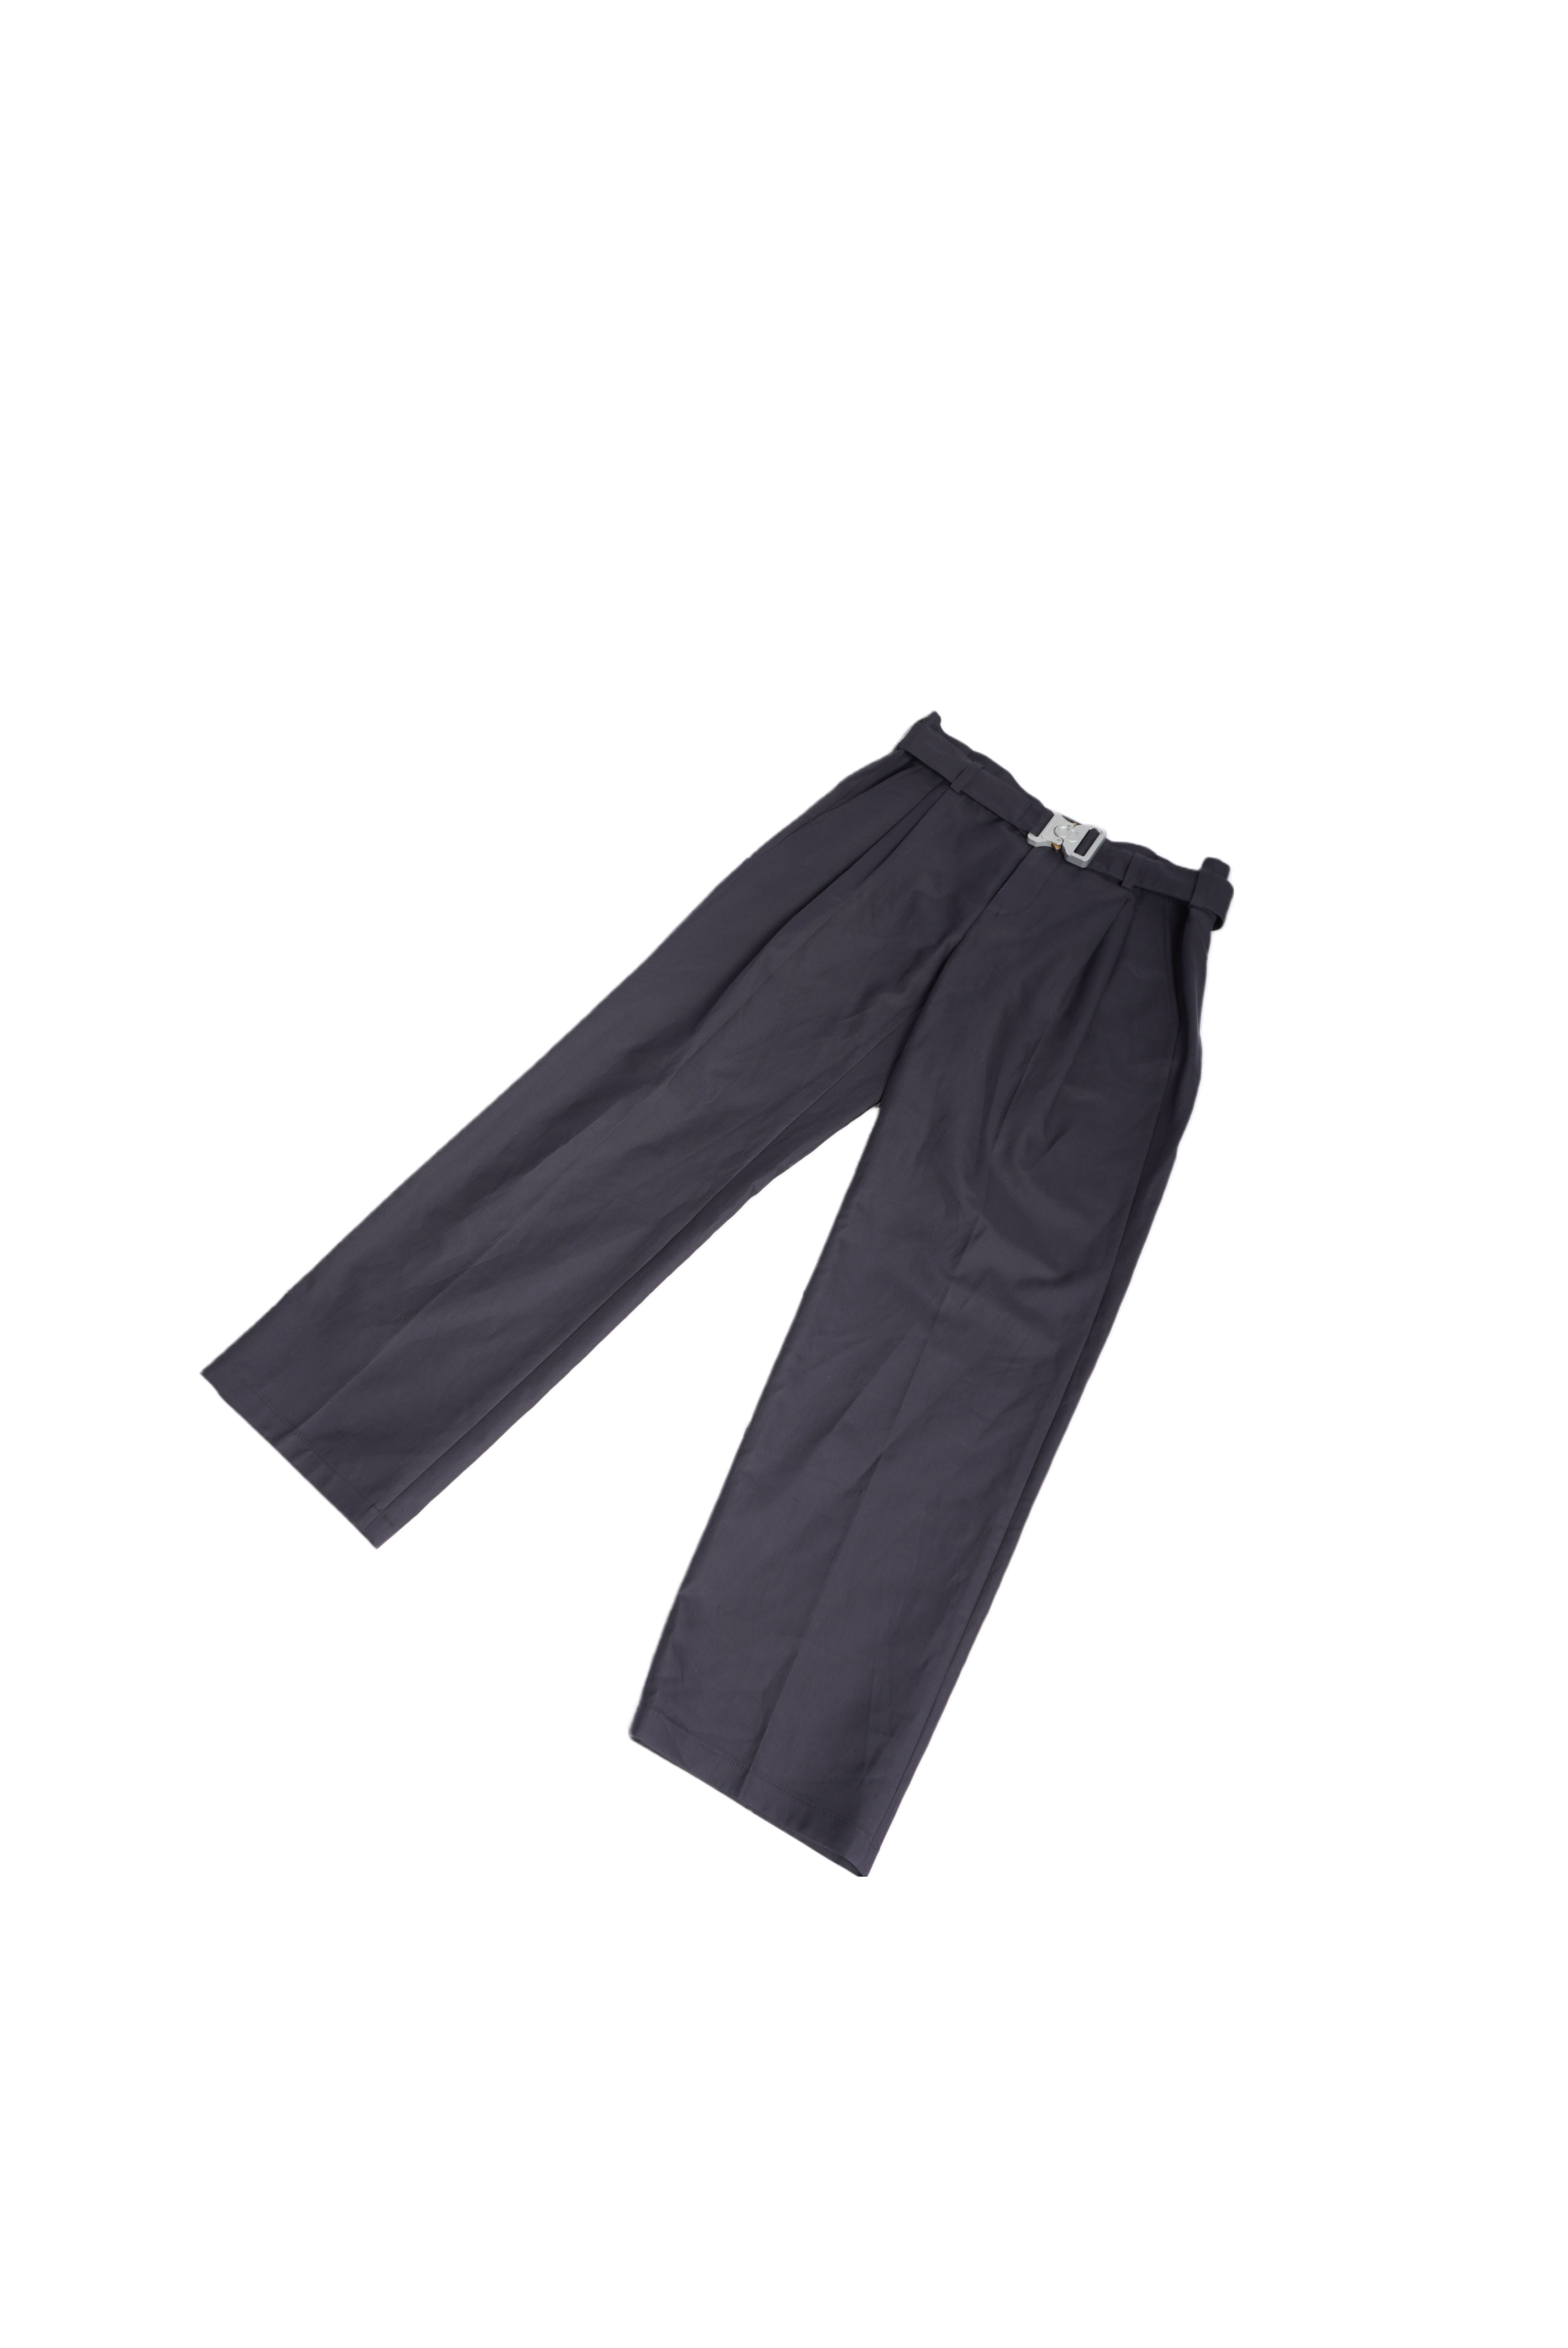 Dior homme Coated Corduroy Skinny Pants (Trousers) Black 27 | PLAYFUL